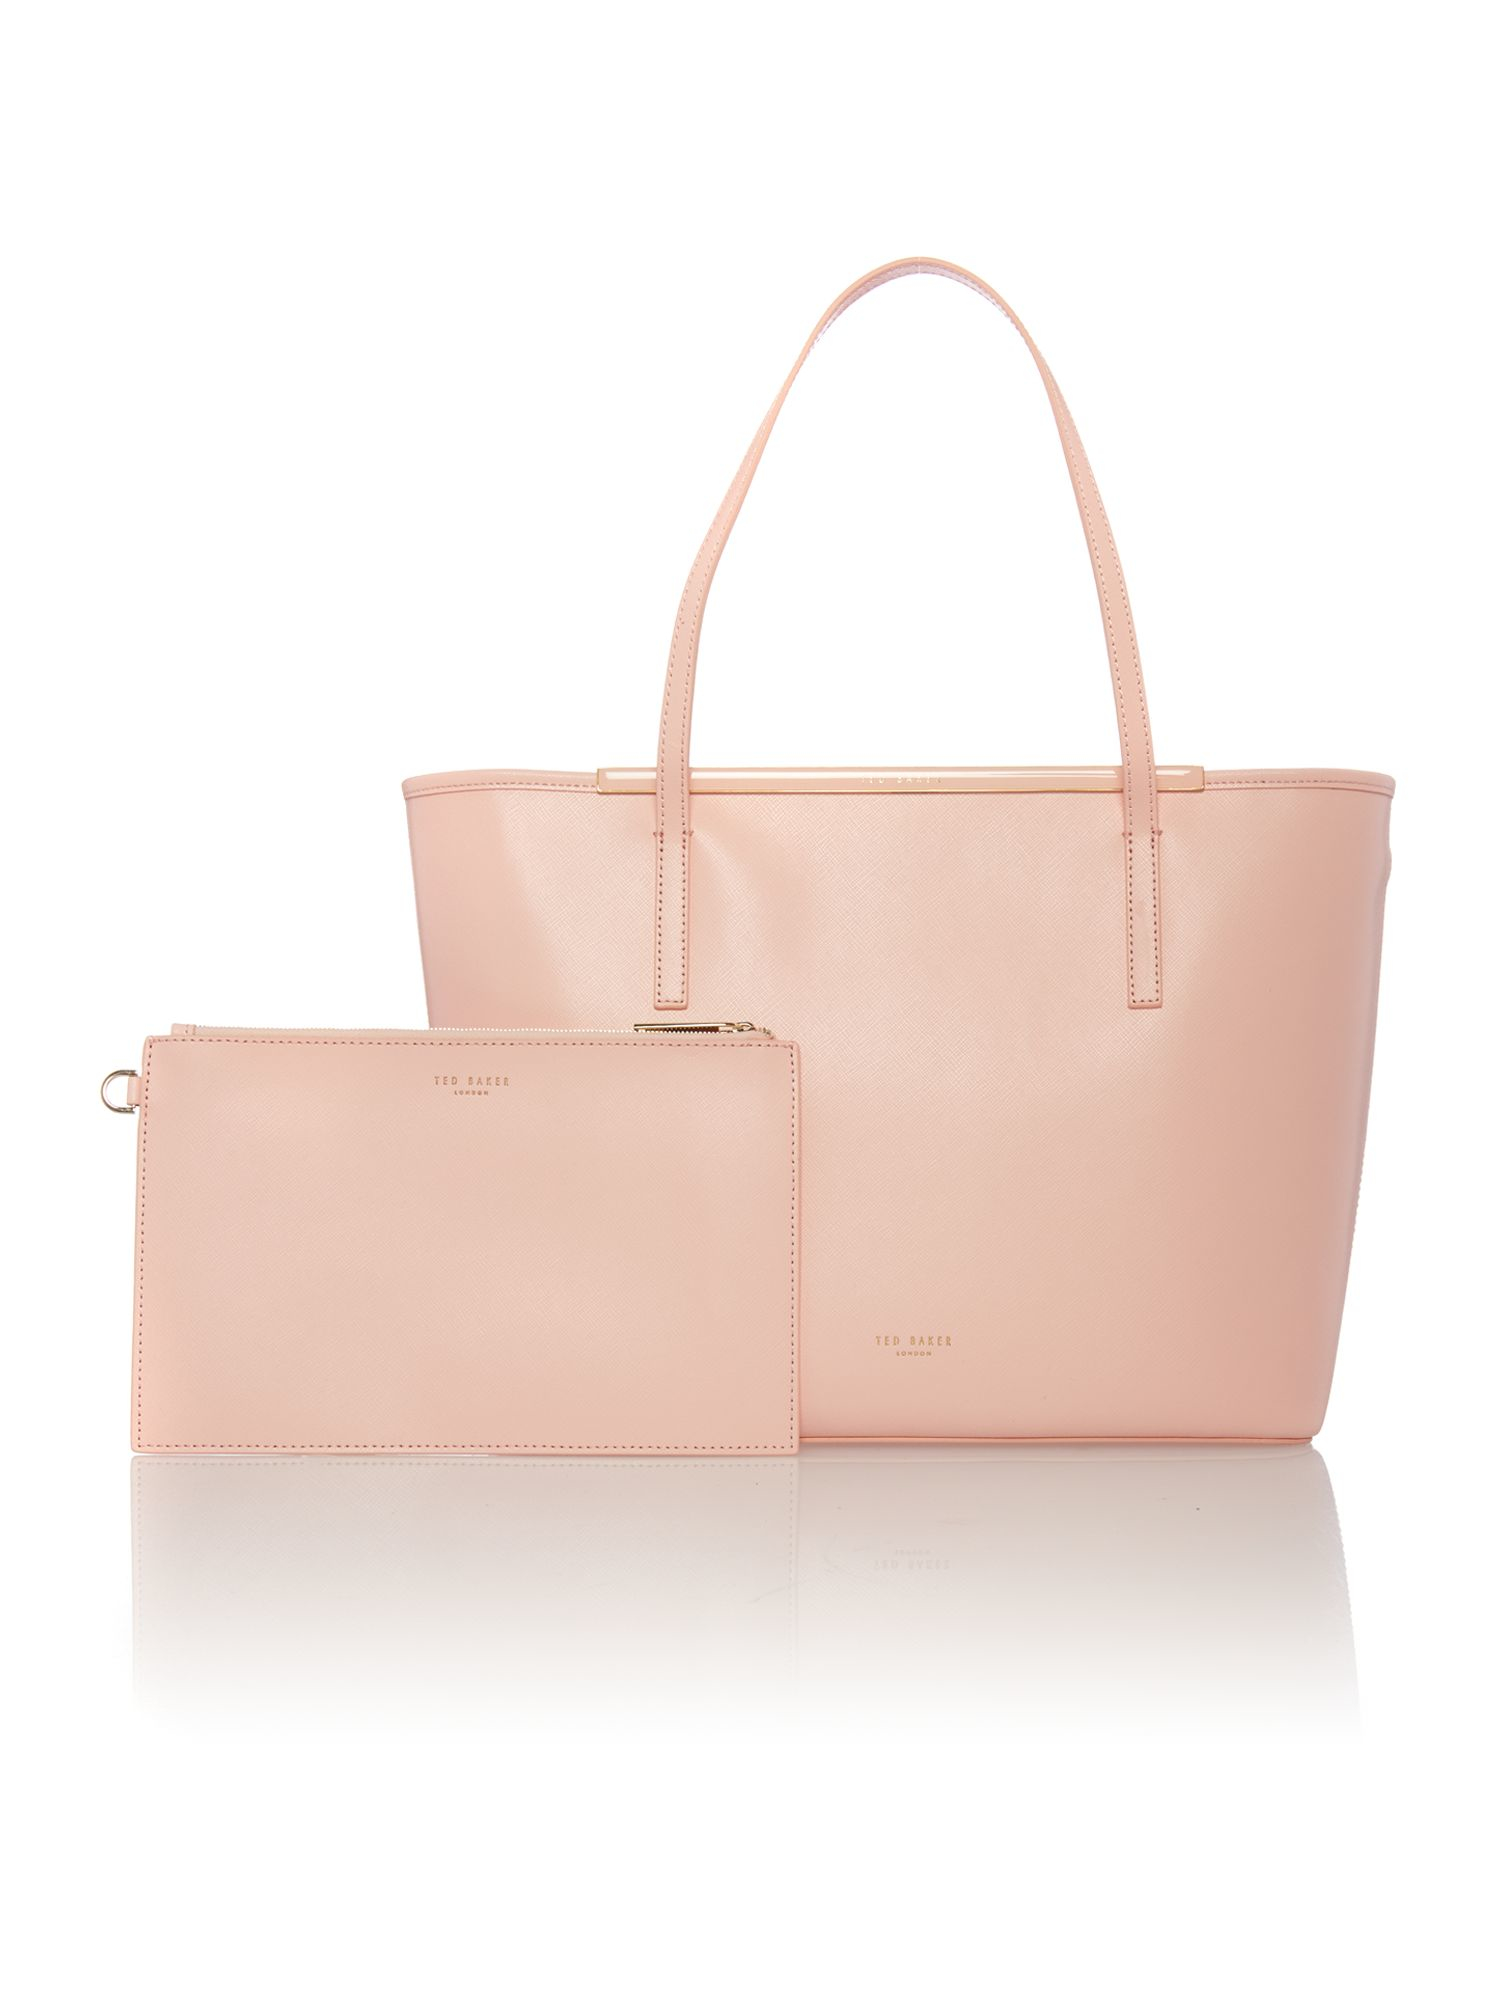 Ted baker Celiaa Light Pink Saffiano Large Tote Bag in Pink | Lyst